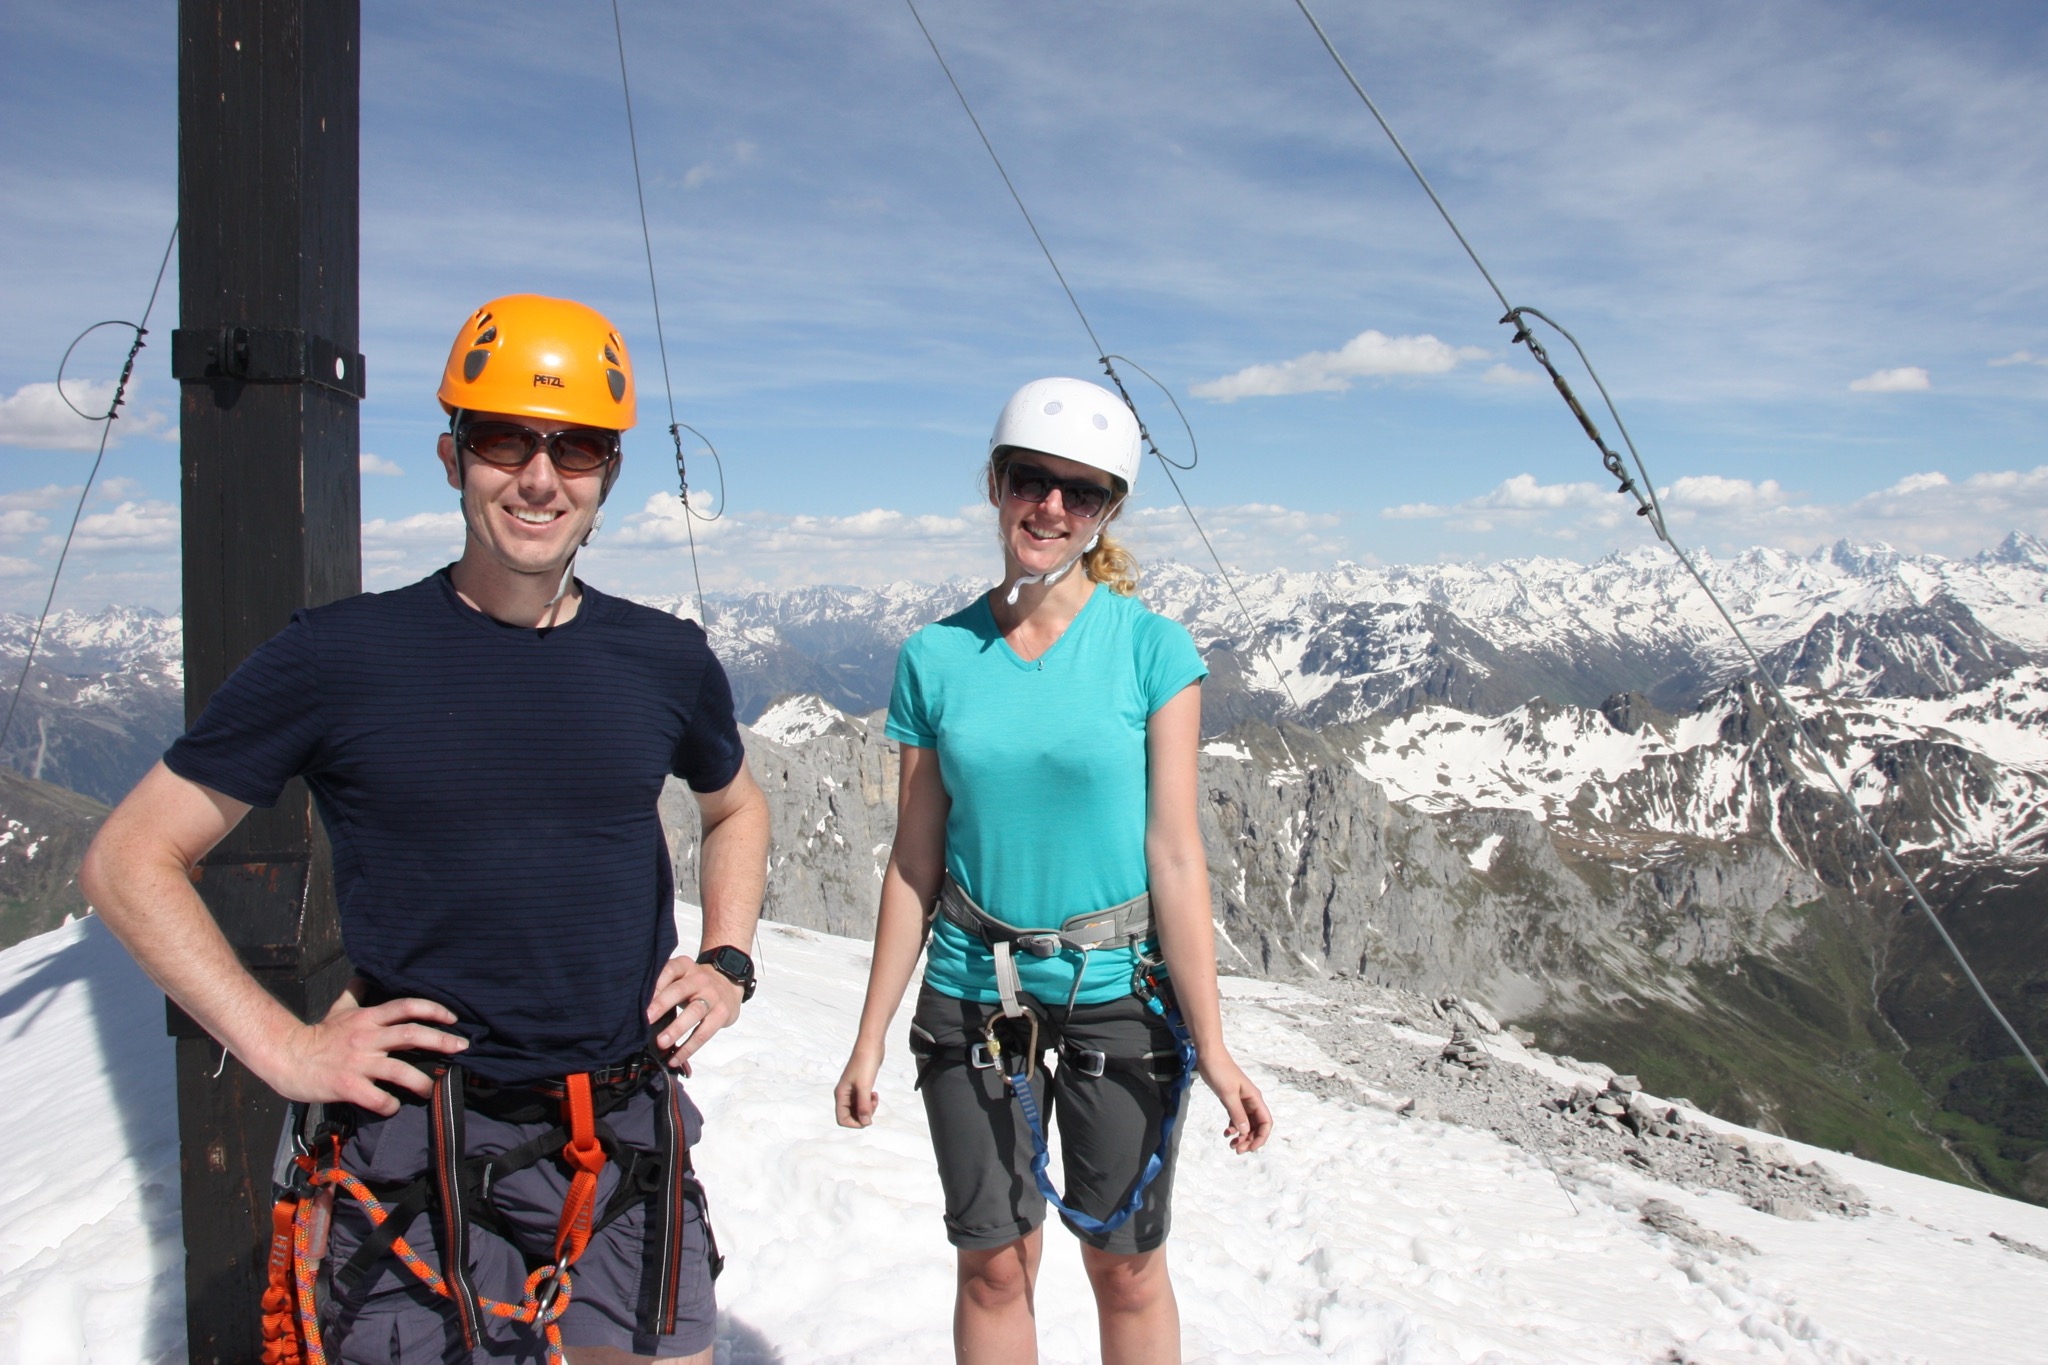 Alexei and Denise at the summit of Sulzfluh (2820m)